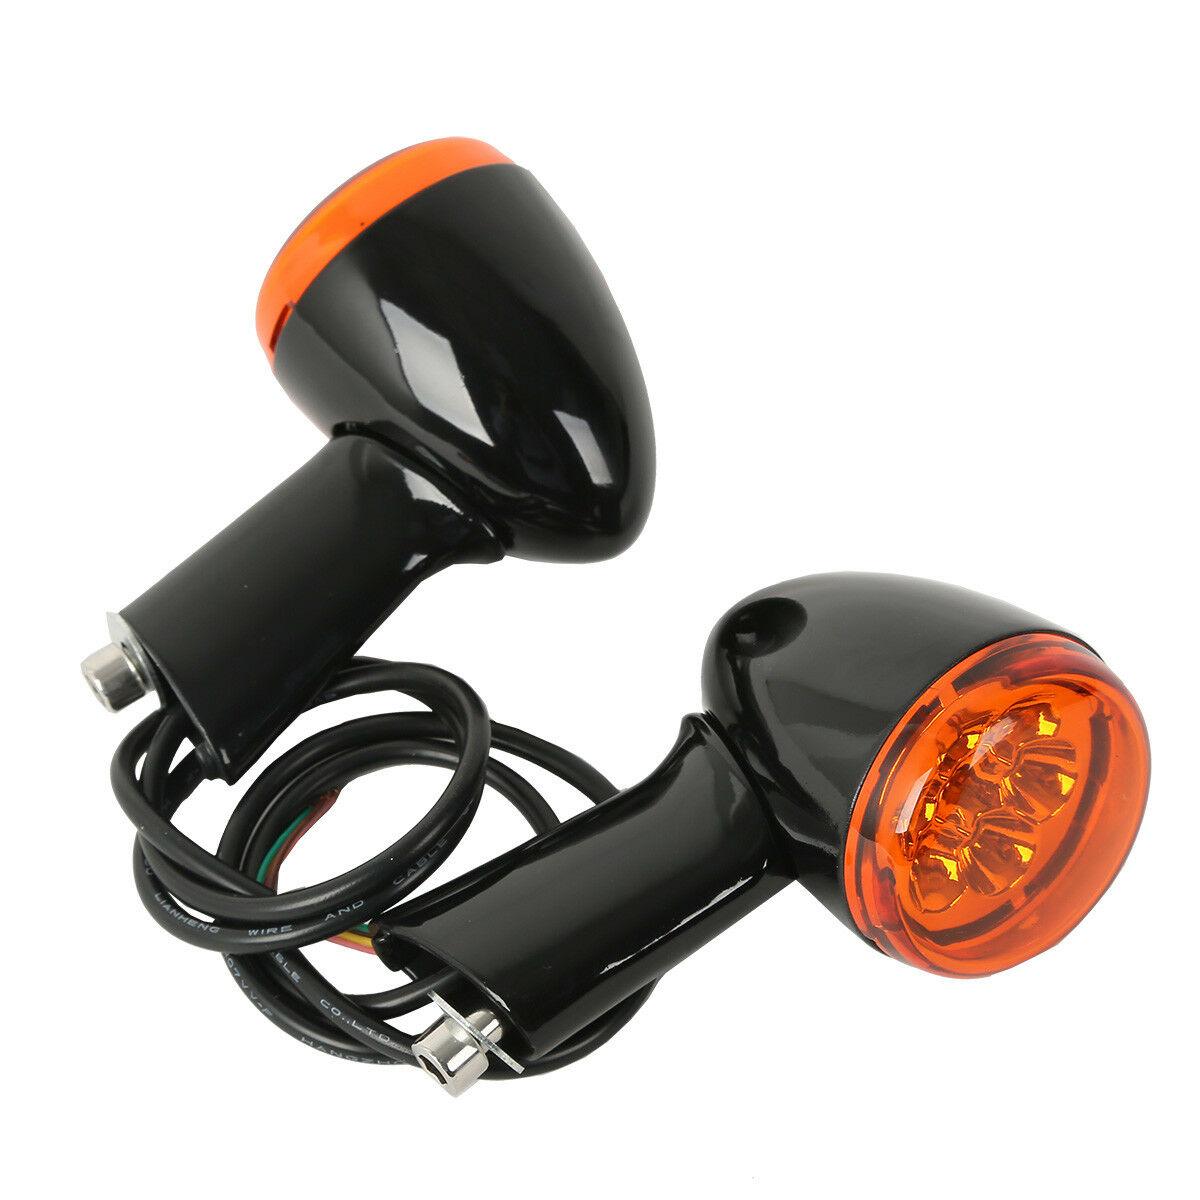 Rear LED Turn Signal Light Fit For Harley Sportster XL883 XL1200 1992-2021 2020 - Moto Life Products